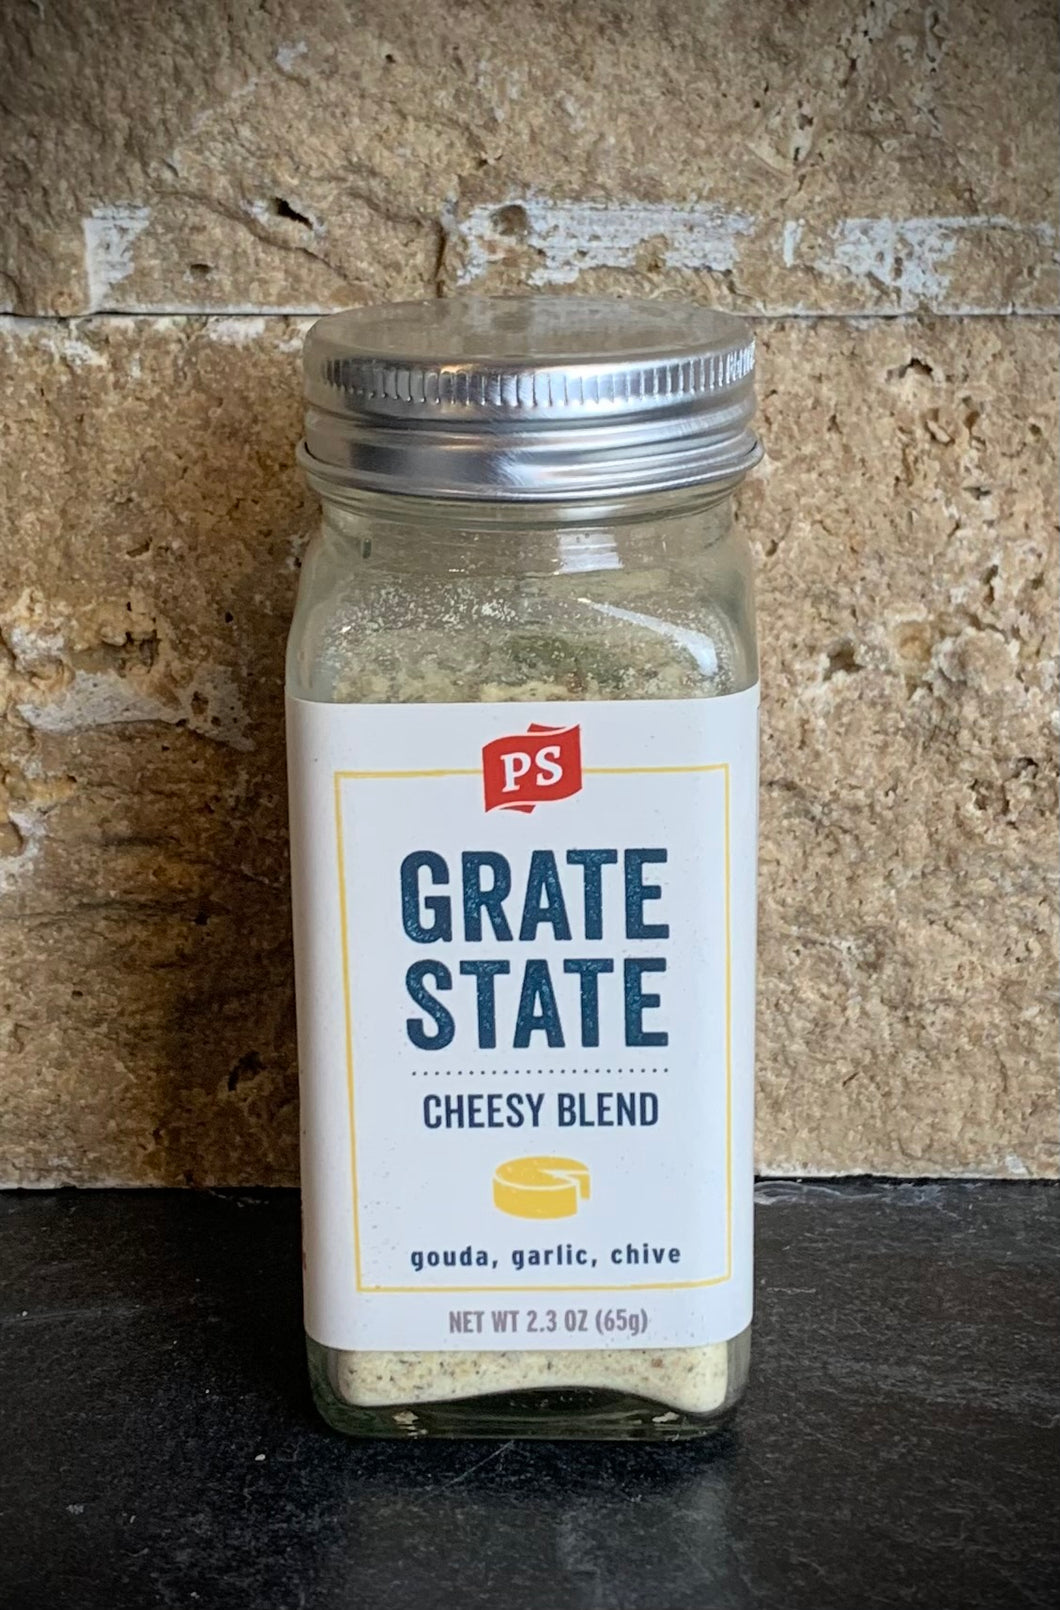 GRATE STATE - CHEESY BLEND